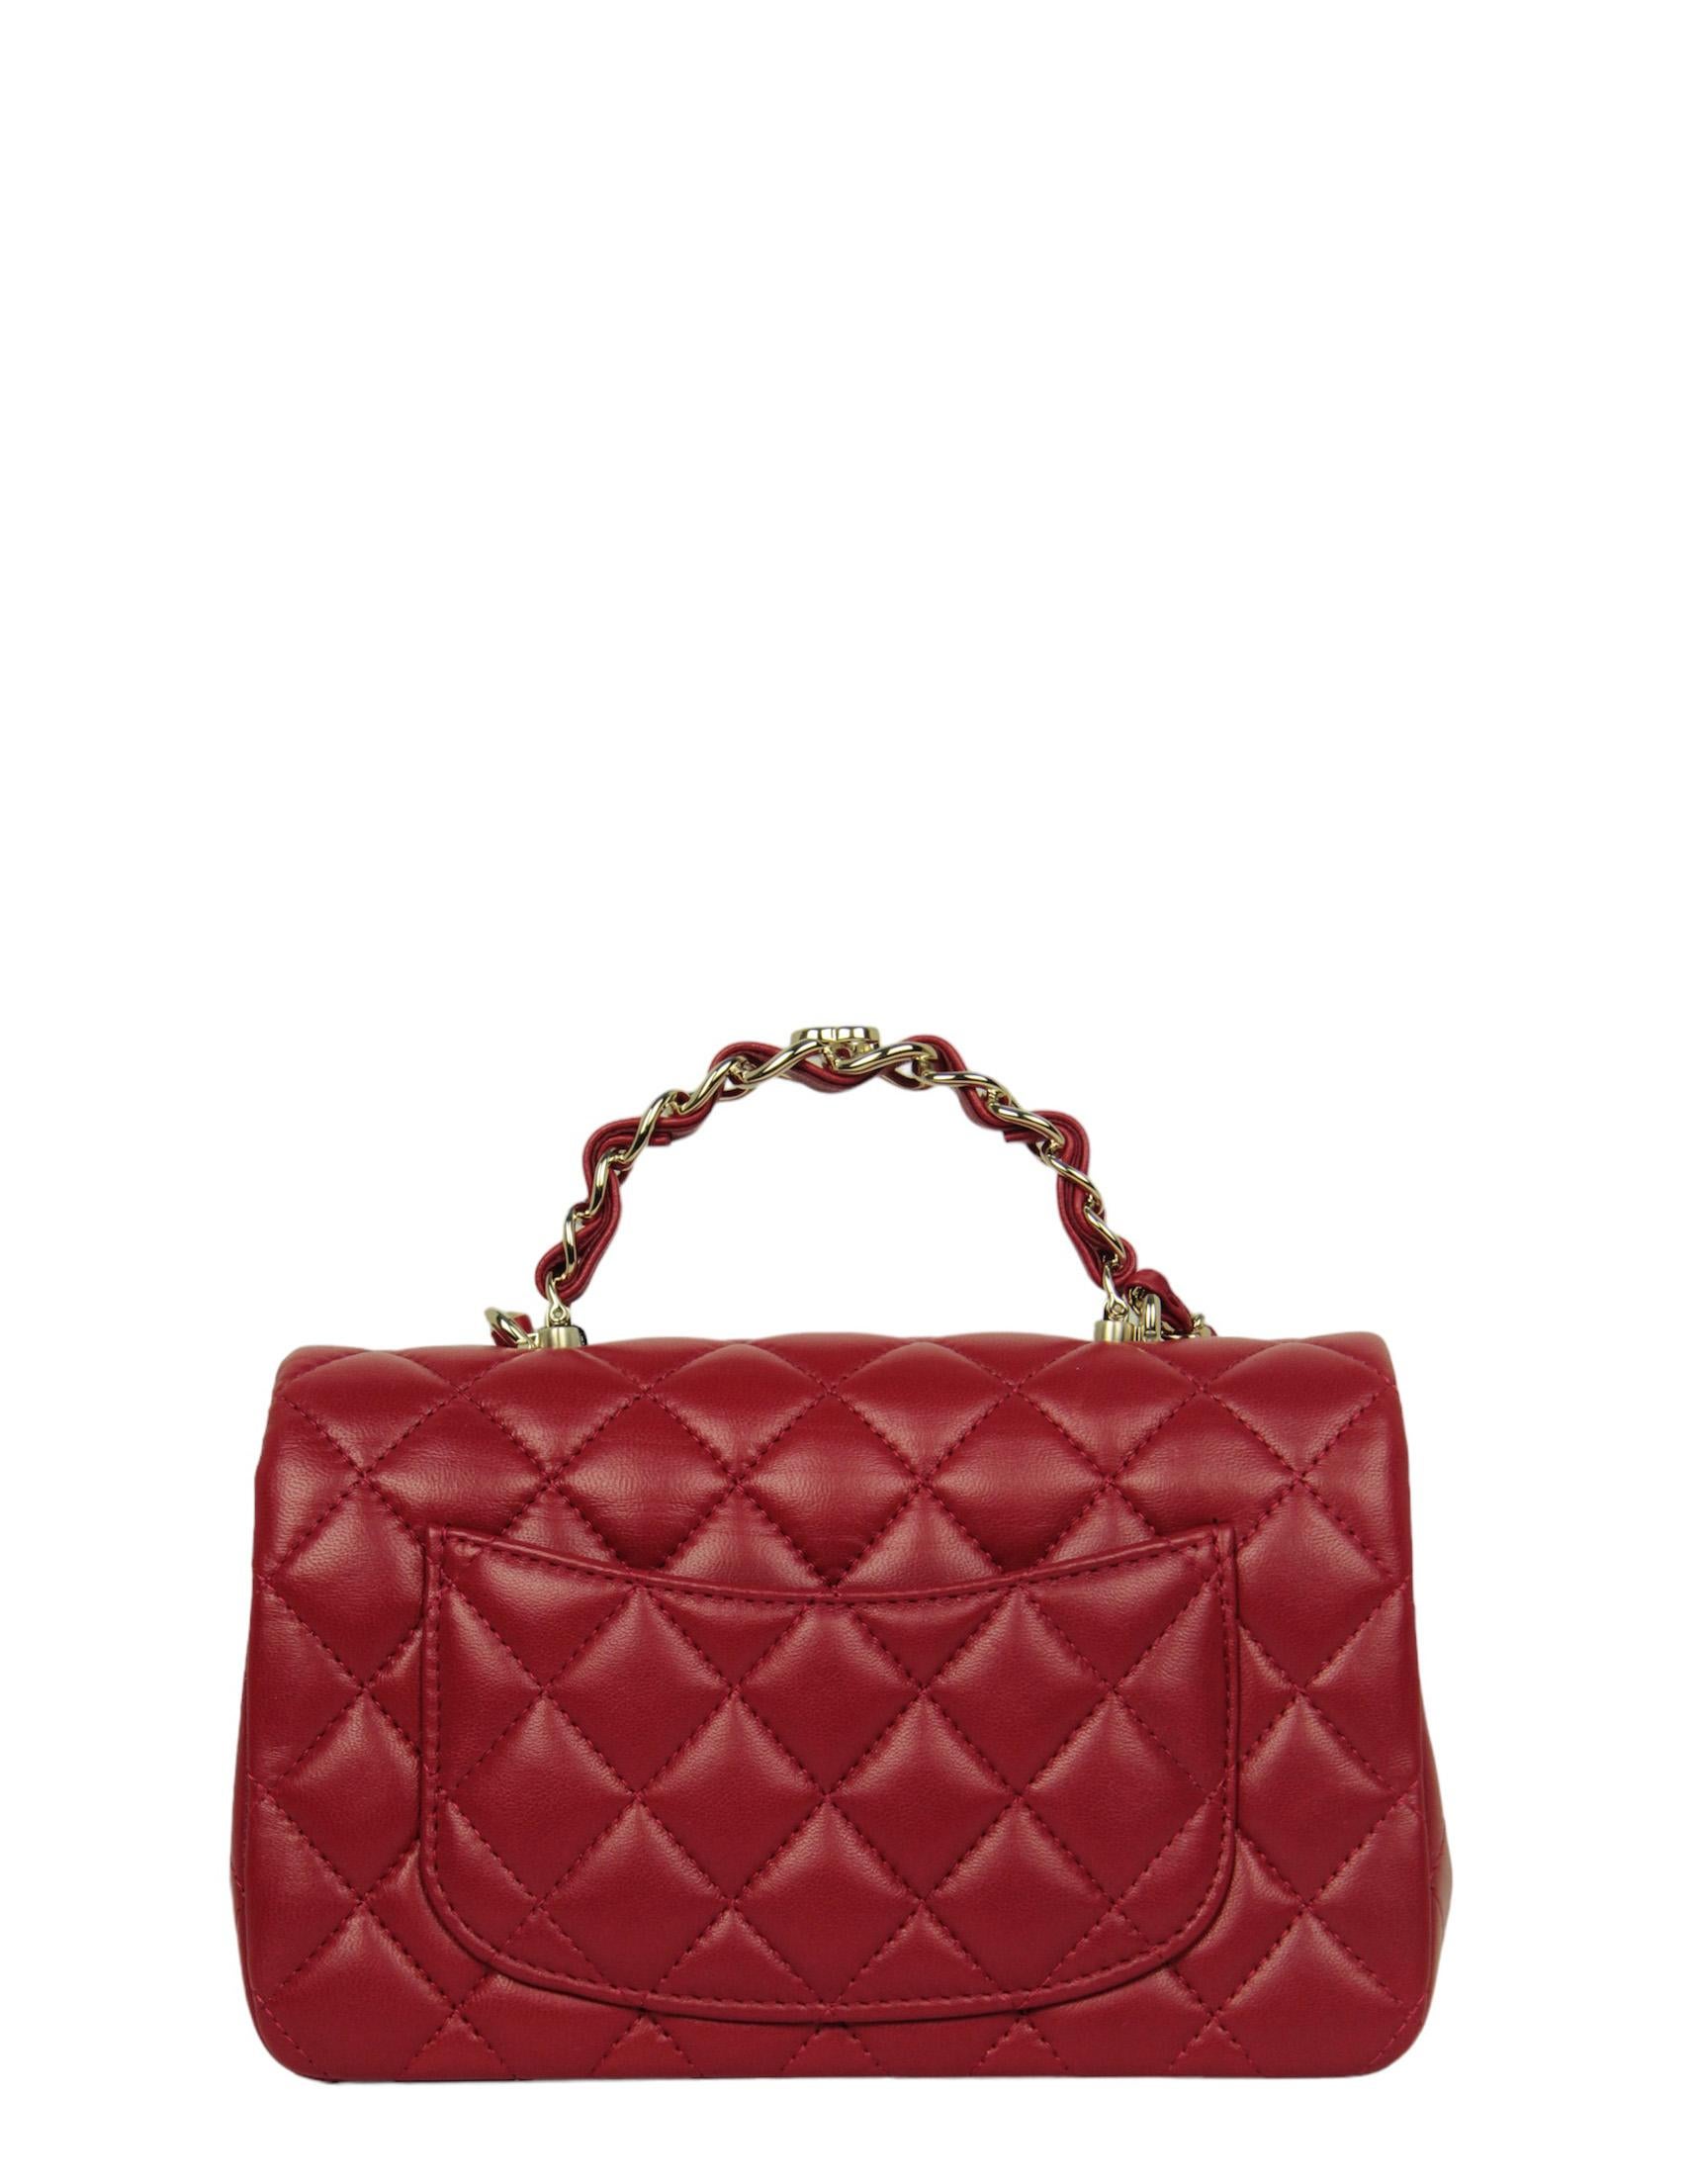 Chanel NWT Red Lambskin Rectangular Mini Flapbag w/ Handle In Excellent Condition For Sale In New York, NY